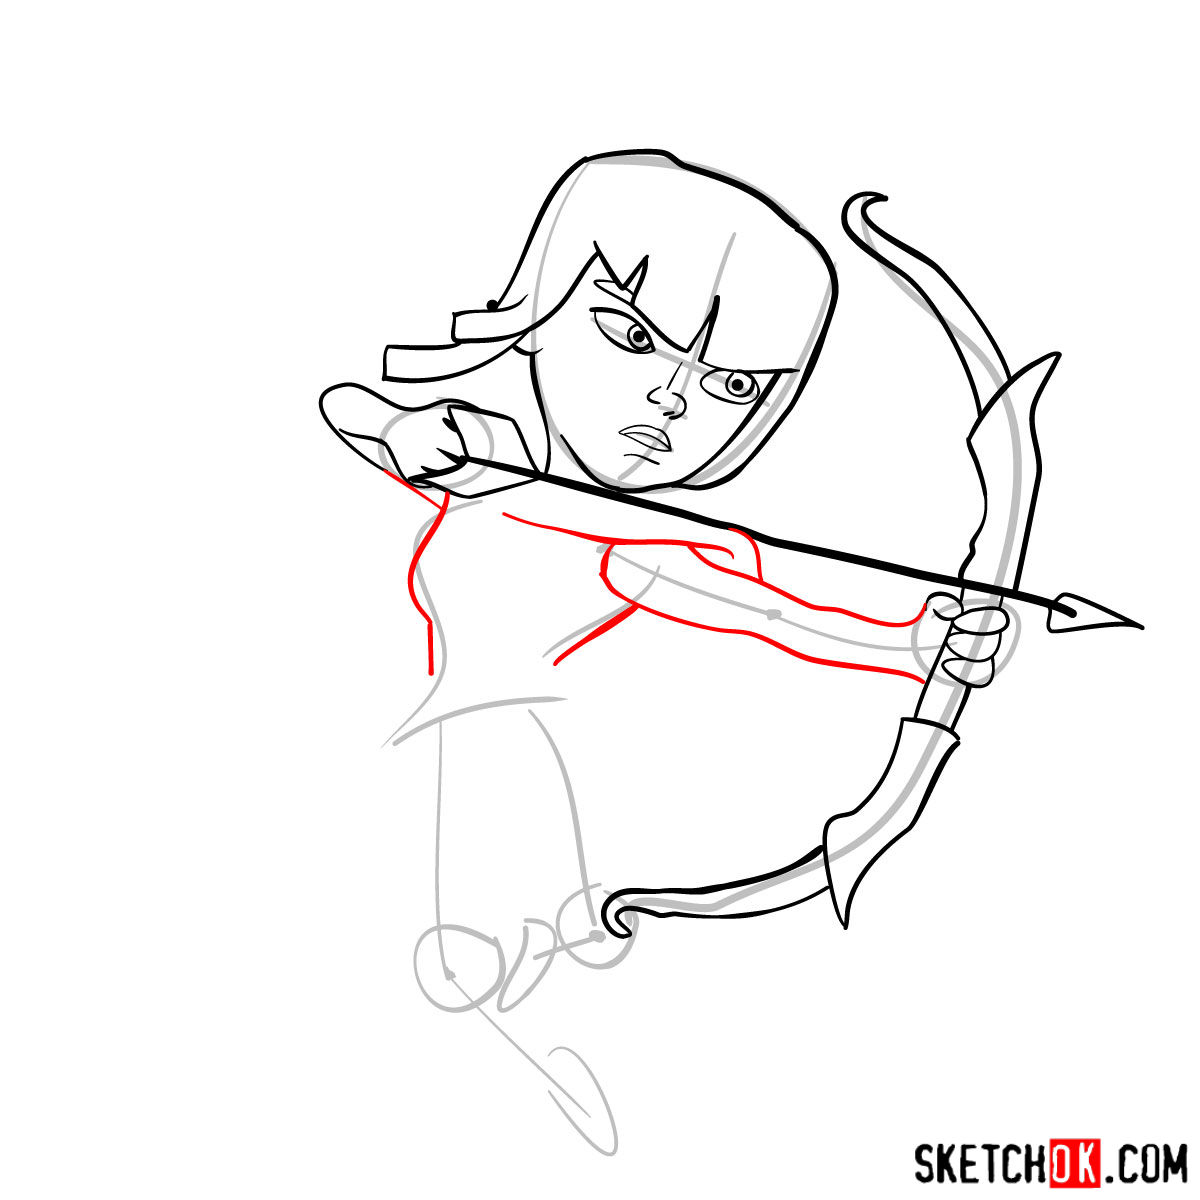 How to draw Archer from Clash of Clans - step 06